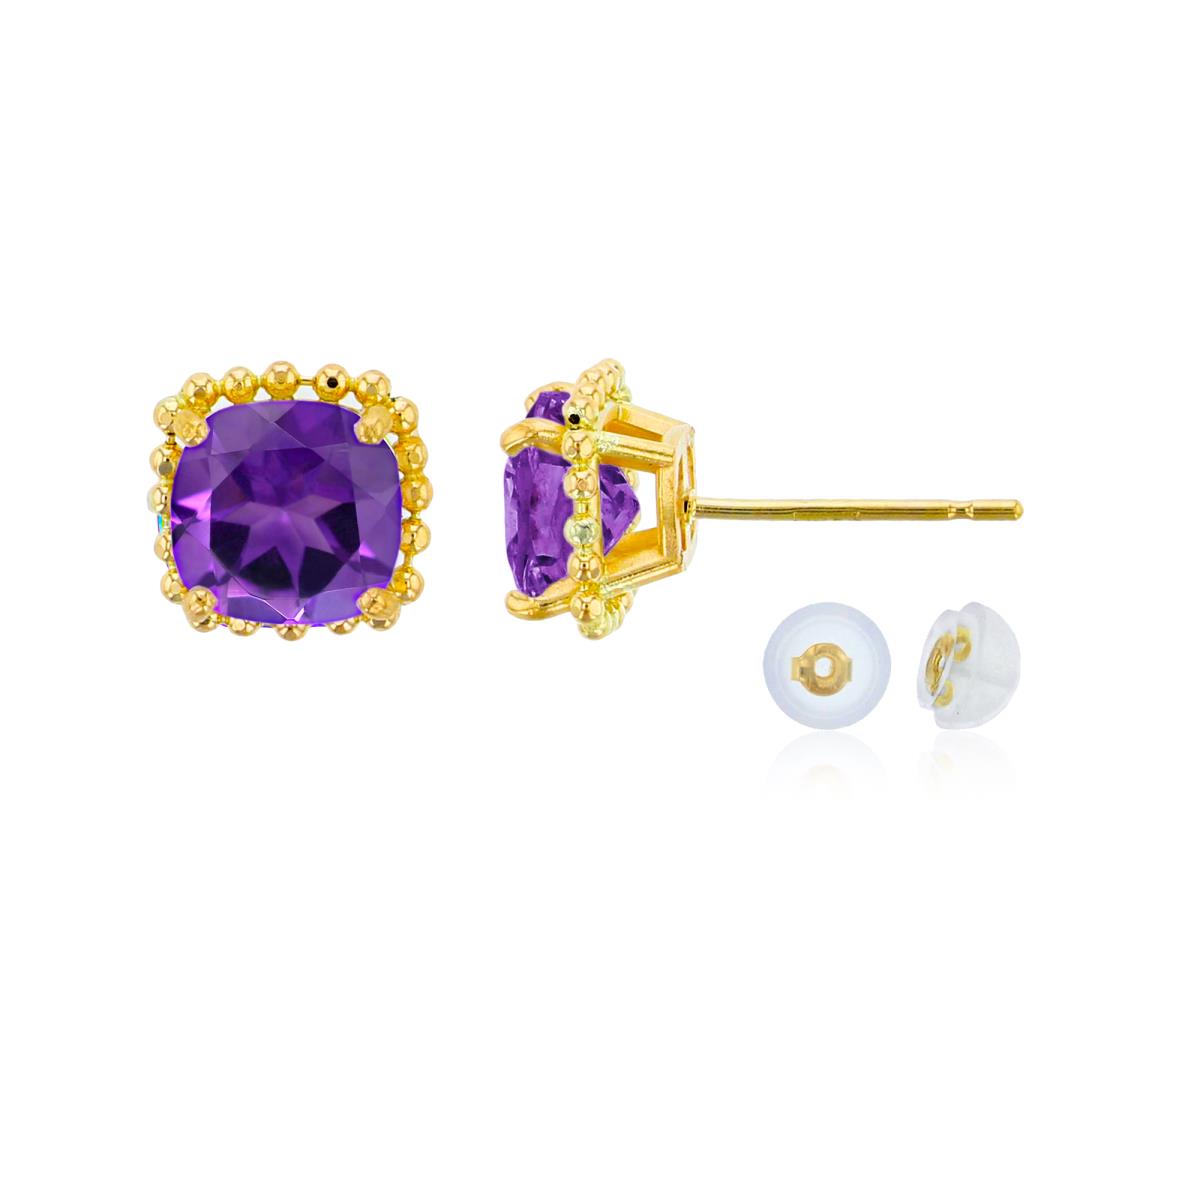 10K Yellow Gold 6x6mm Cushion Cut Amethyst Bead Frame Stud Earring with Silicone Back